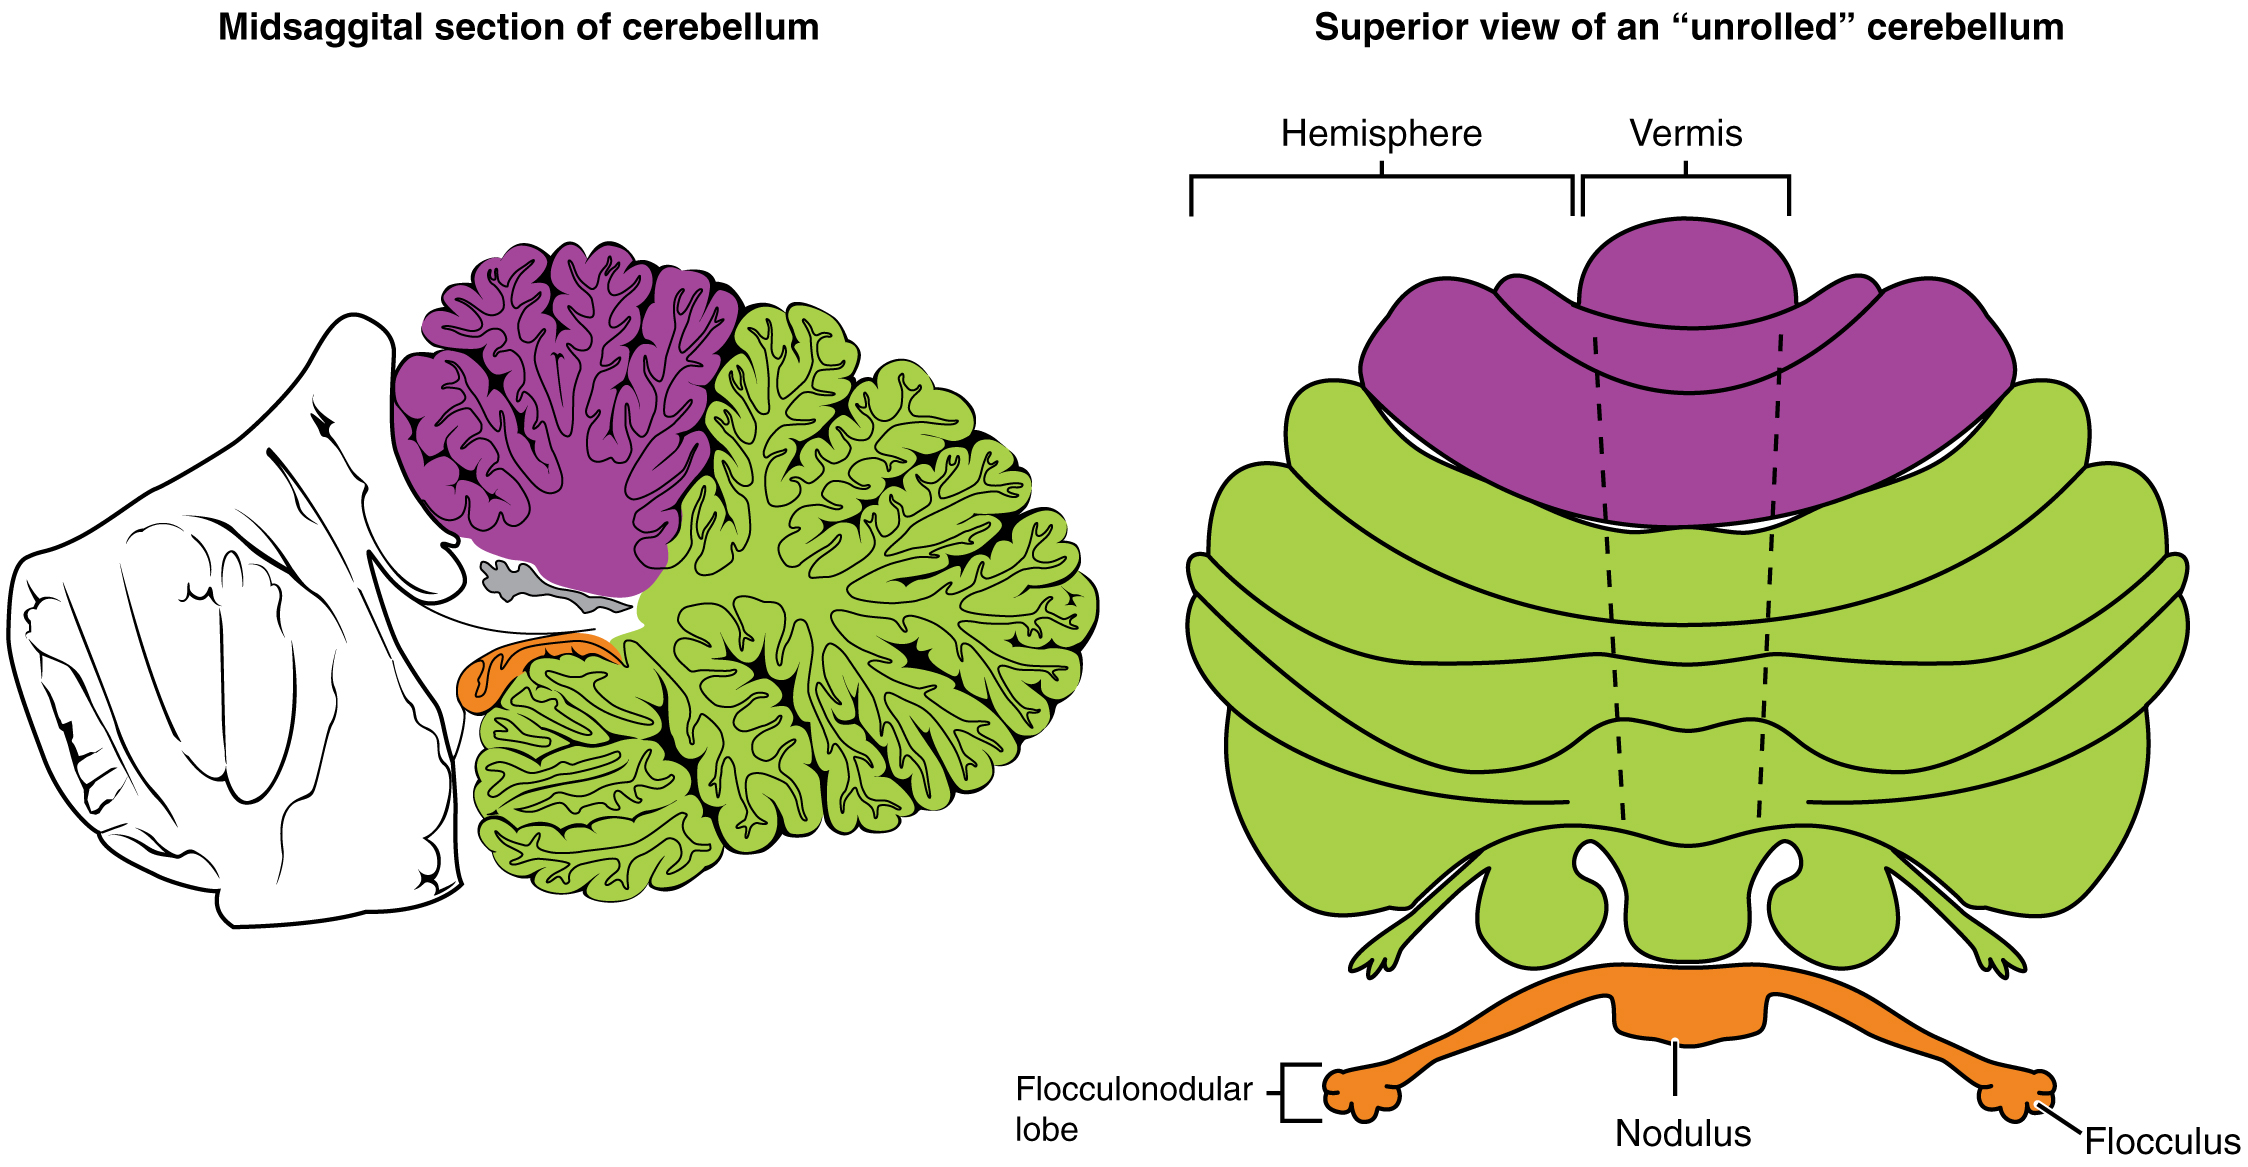 The left panel of this figure shows the midsagittal section of the cerebellum, and the right panel shows the superior view. In both panels, the major parts are labeled.